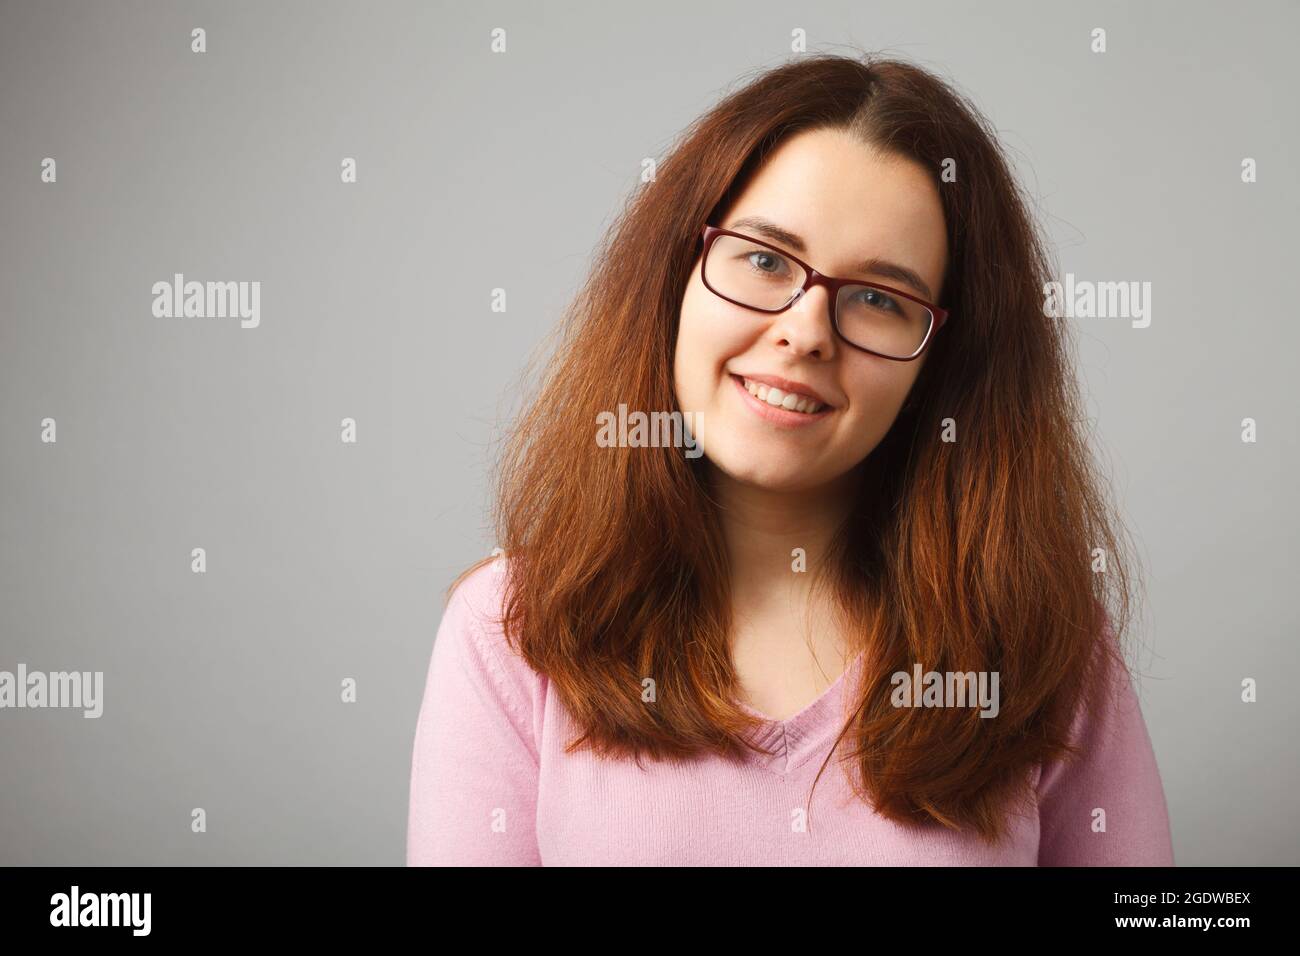 Redhead long-haired girl with glasses smiles, looking at the camera. Studio portrait of a girl on a solid light background. Stock Photo